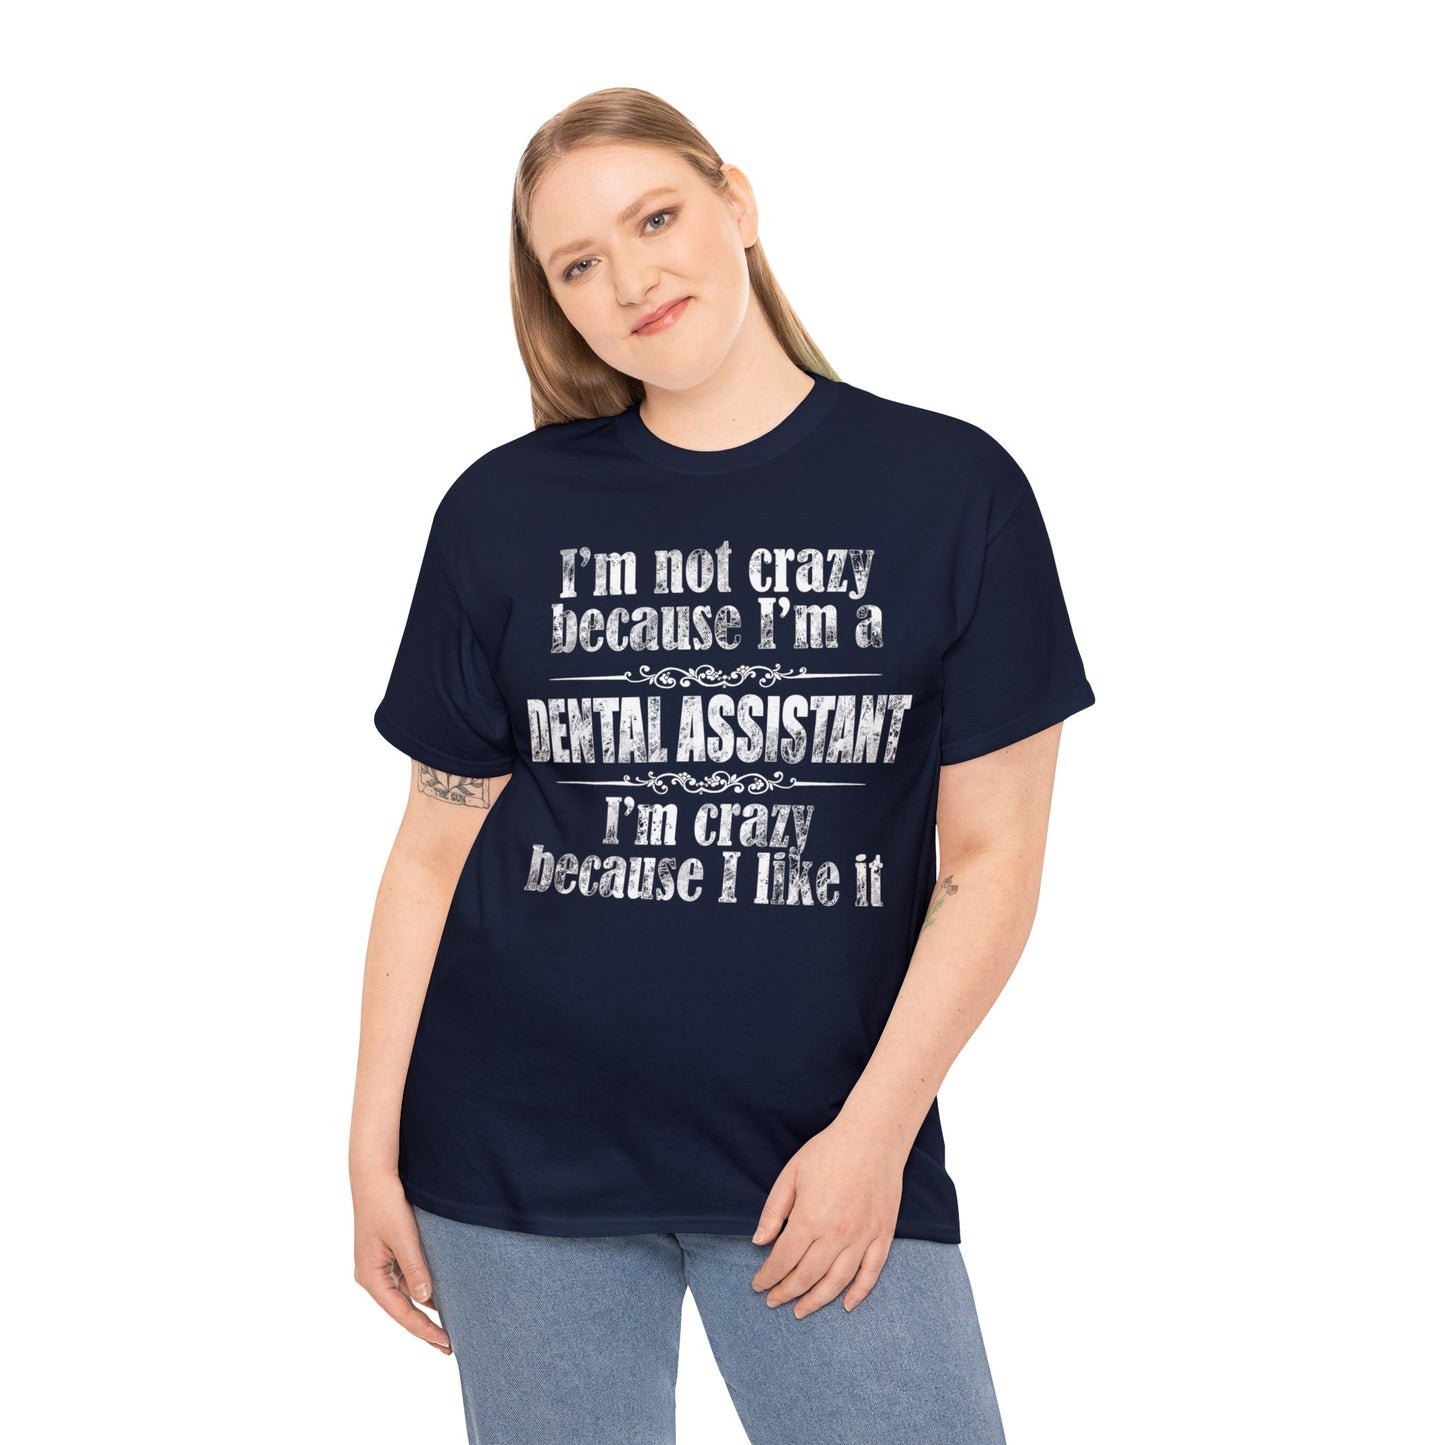 Embrace Your Passion with our 'Not Crazy, Just a Dental Assistant' T-Shirt Collection!